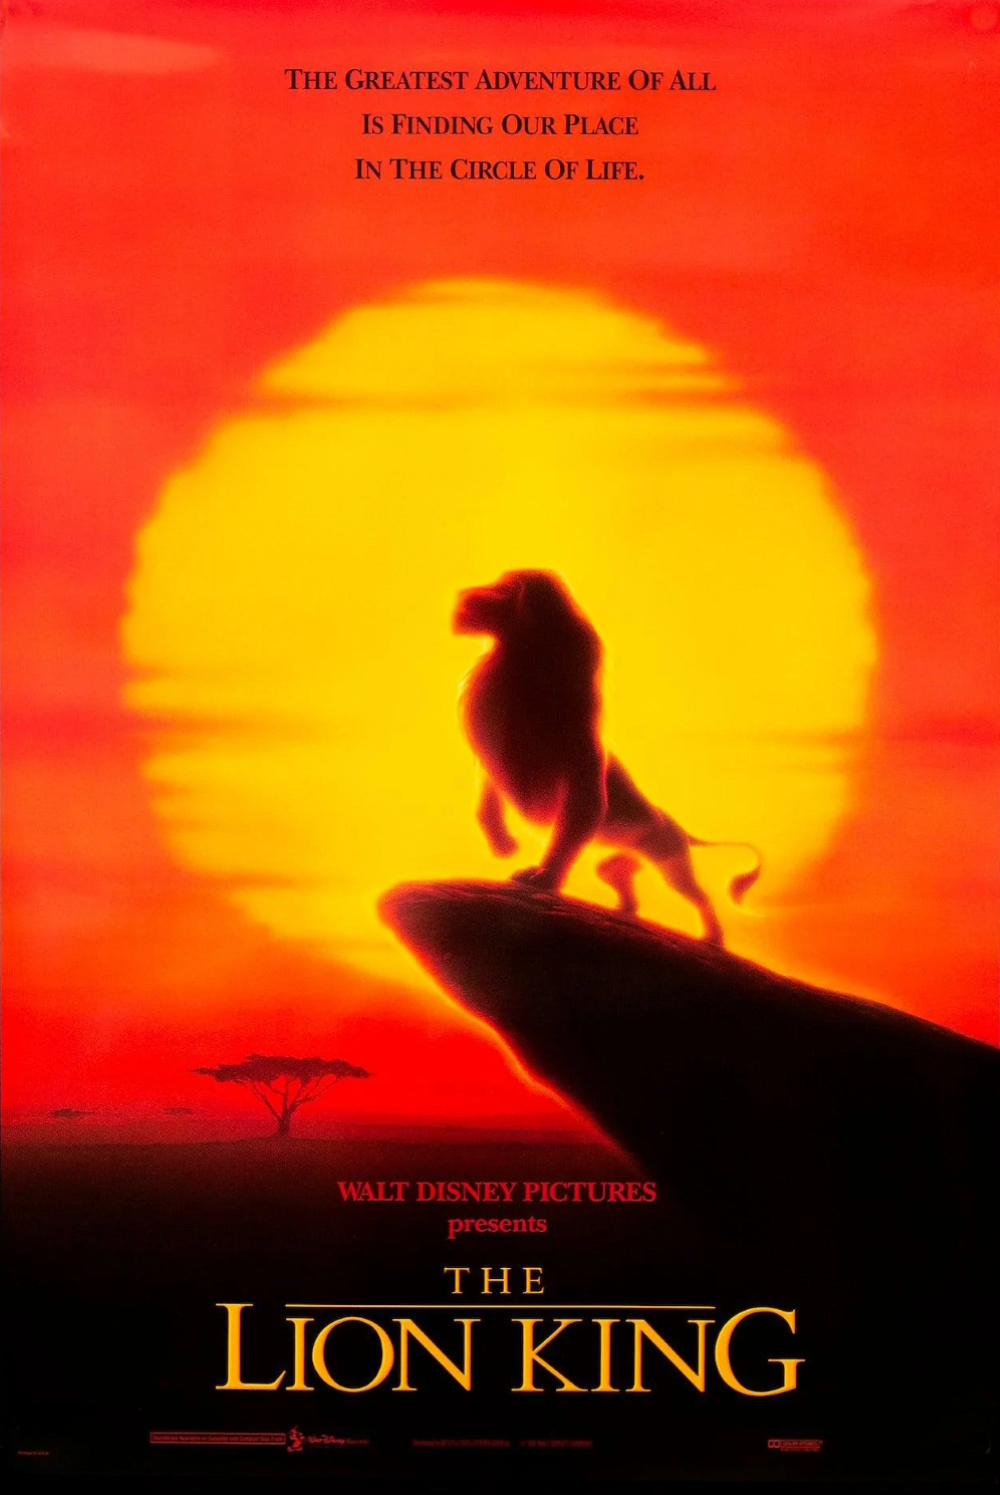 'The Lion King' (1994): Gary Trousdale worked on the story of this blockbuster and (with Kirk Wise) 